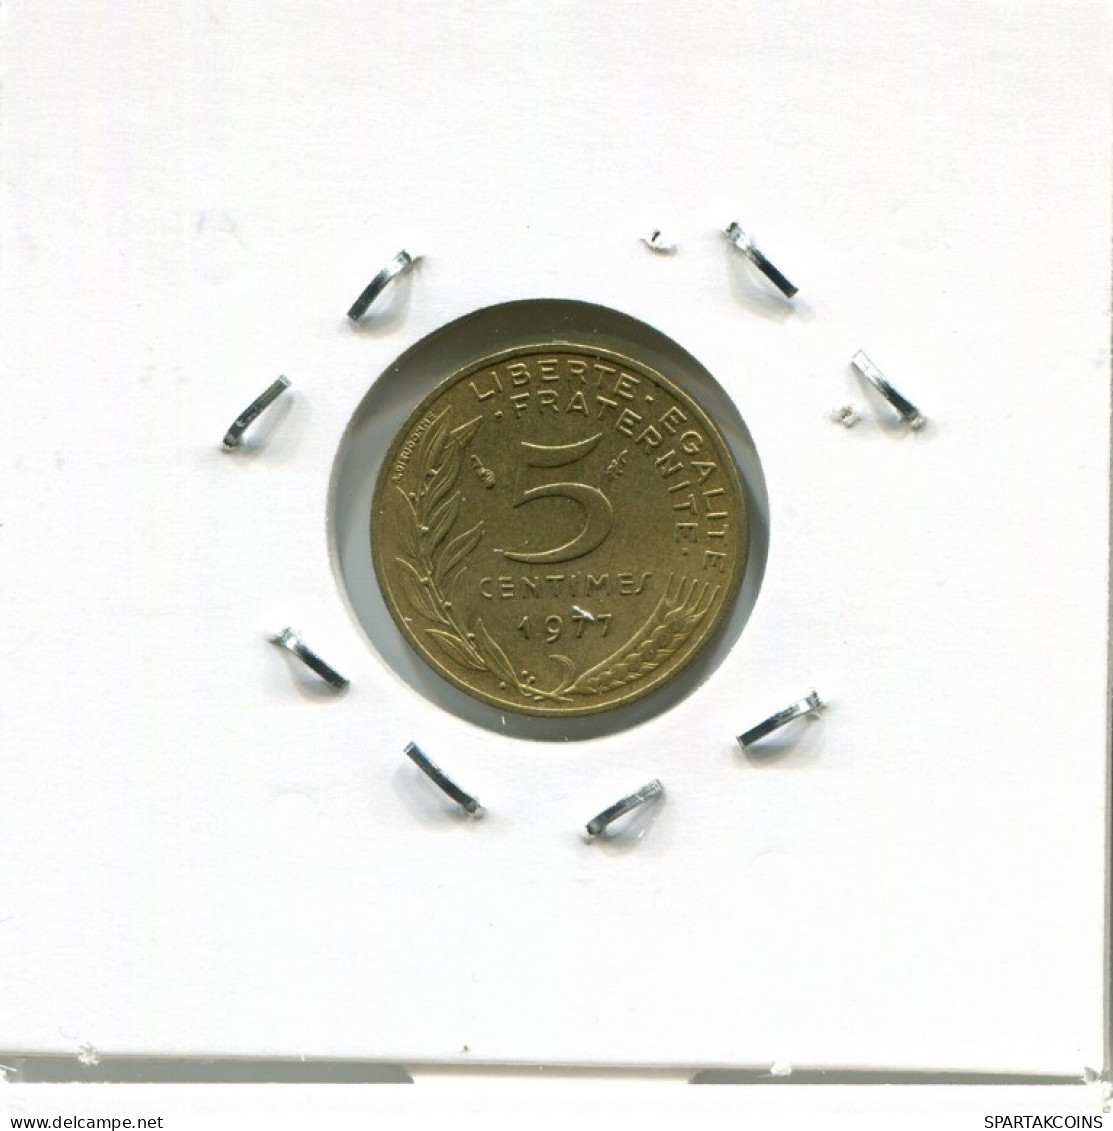 5 CENTIMES 1977 FRANCE Coin French Coin #AN808.U.A - 5 Centimes